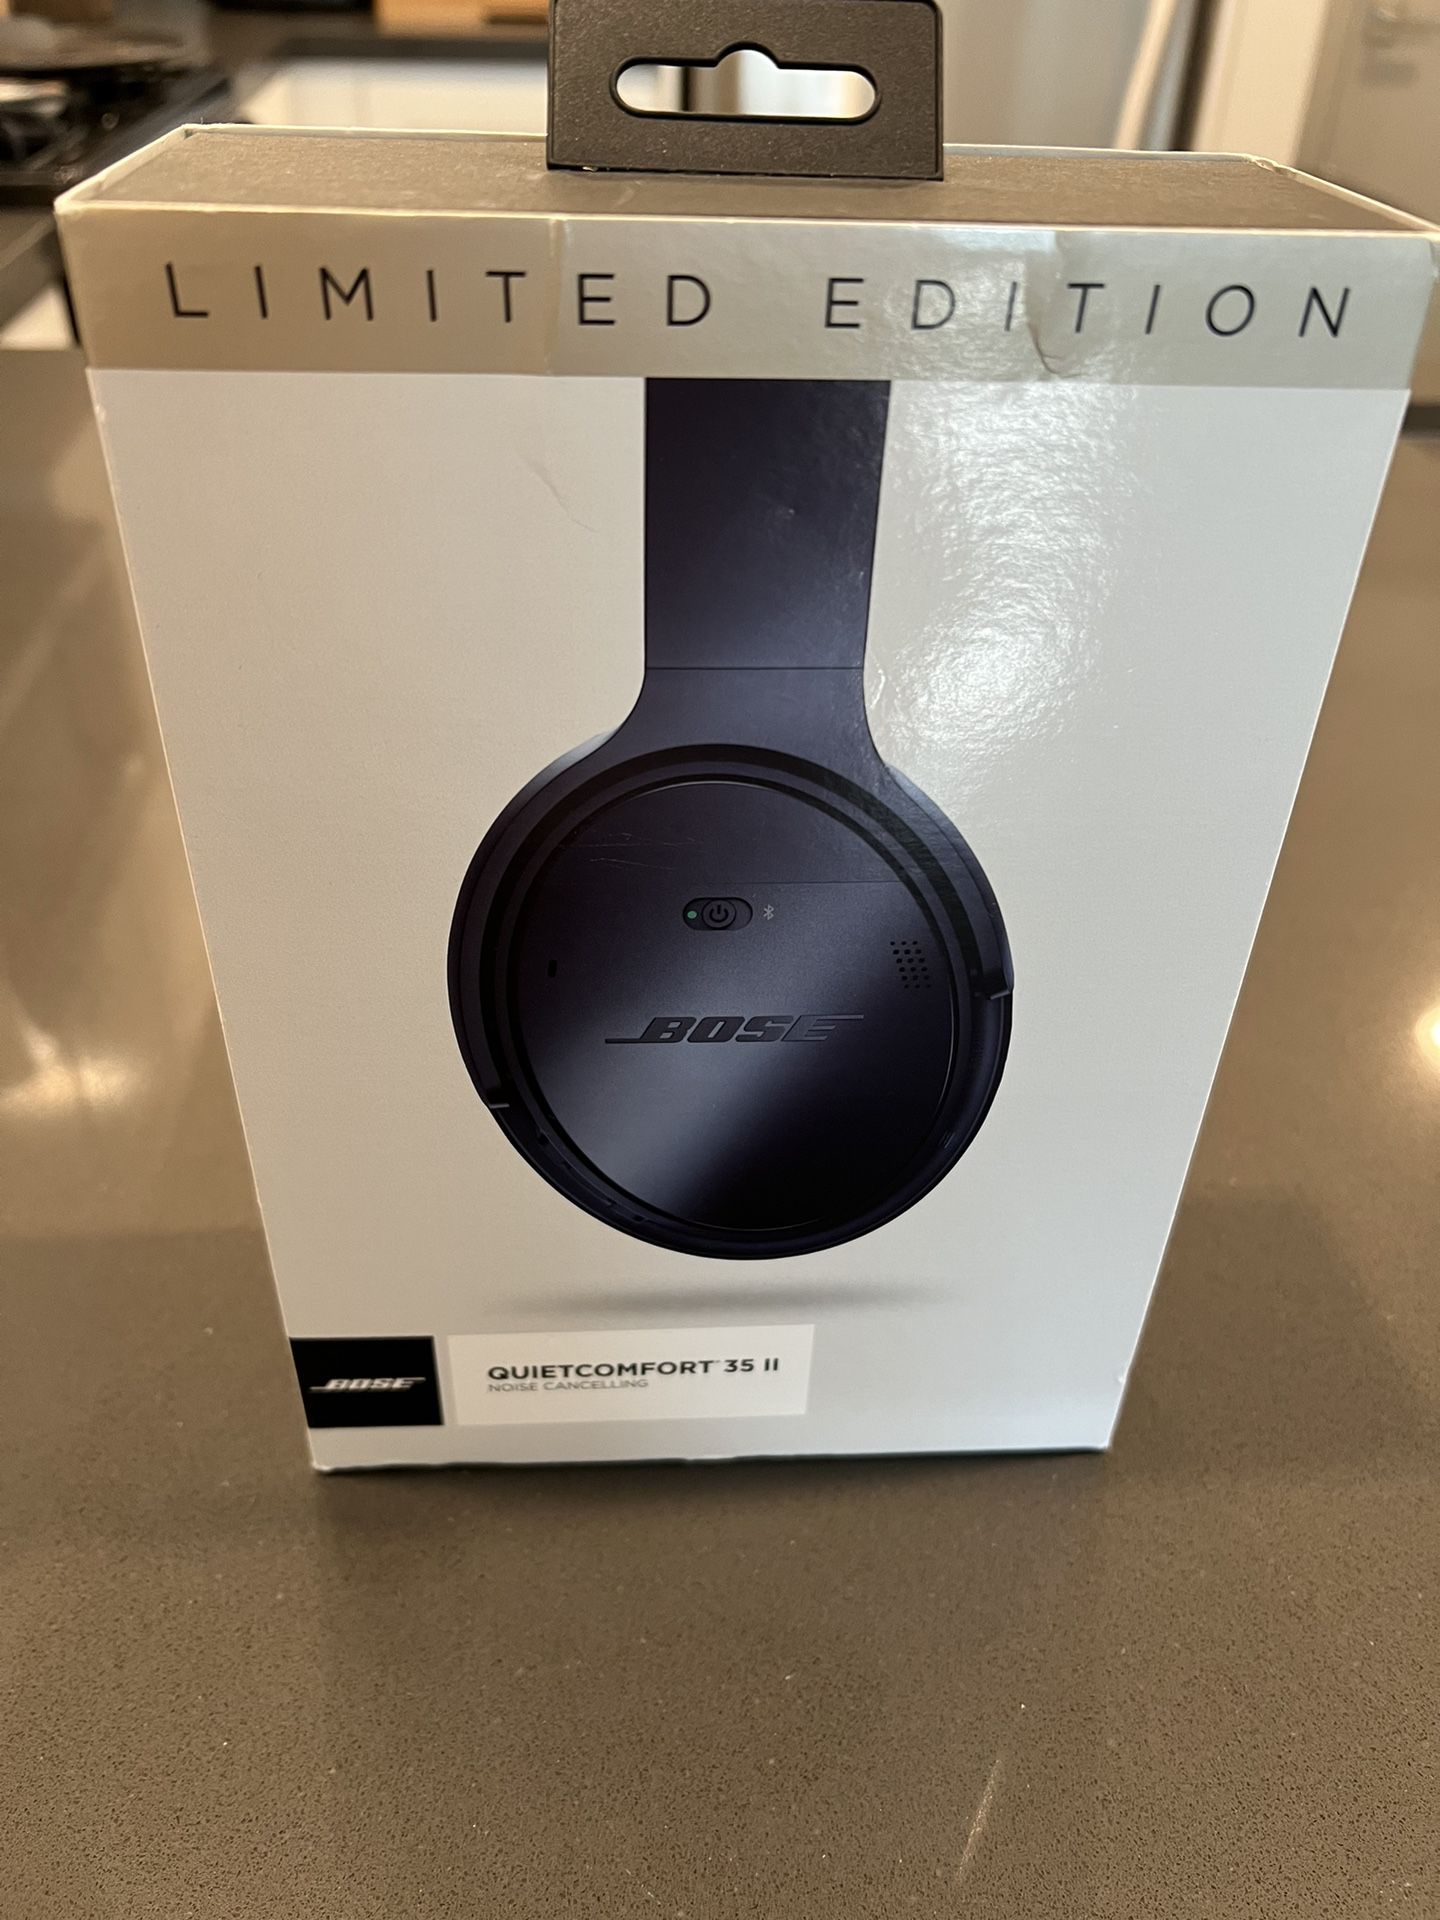 bacon Ryg, ryg, ryg del skibsbygning Bose Quiet Comfort 35 II Noise Cancelling Limited Edition Wireless  Headphones for Sale in Las Vegas, NV - OfferUp